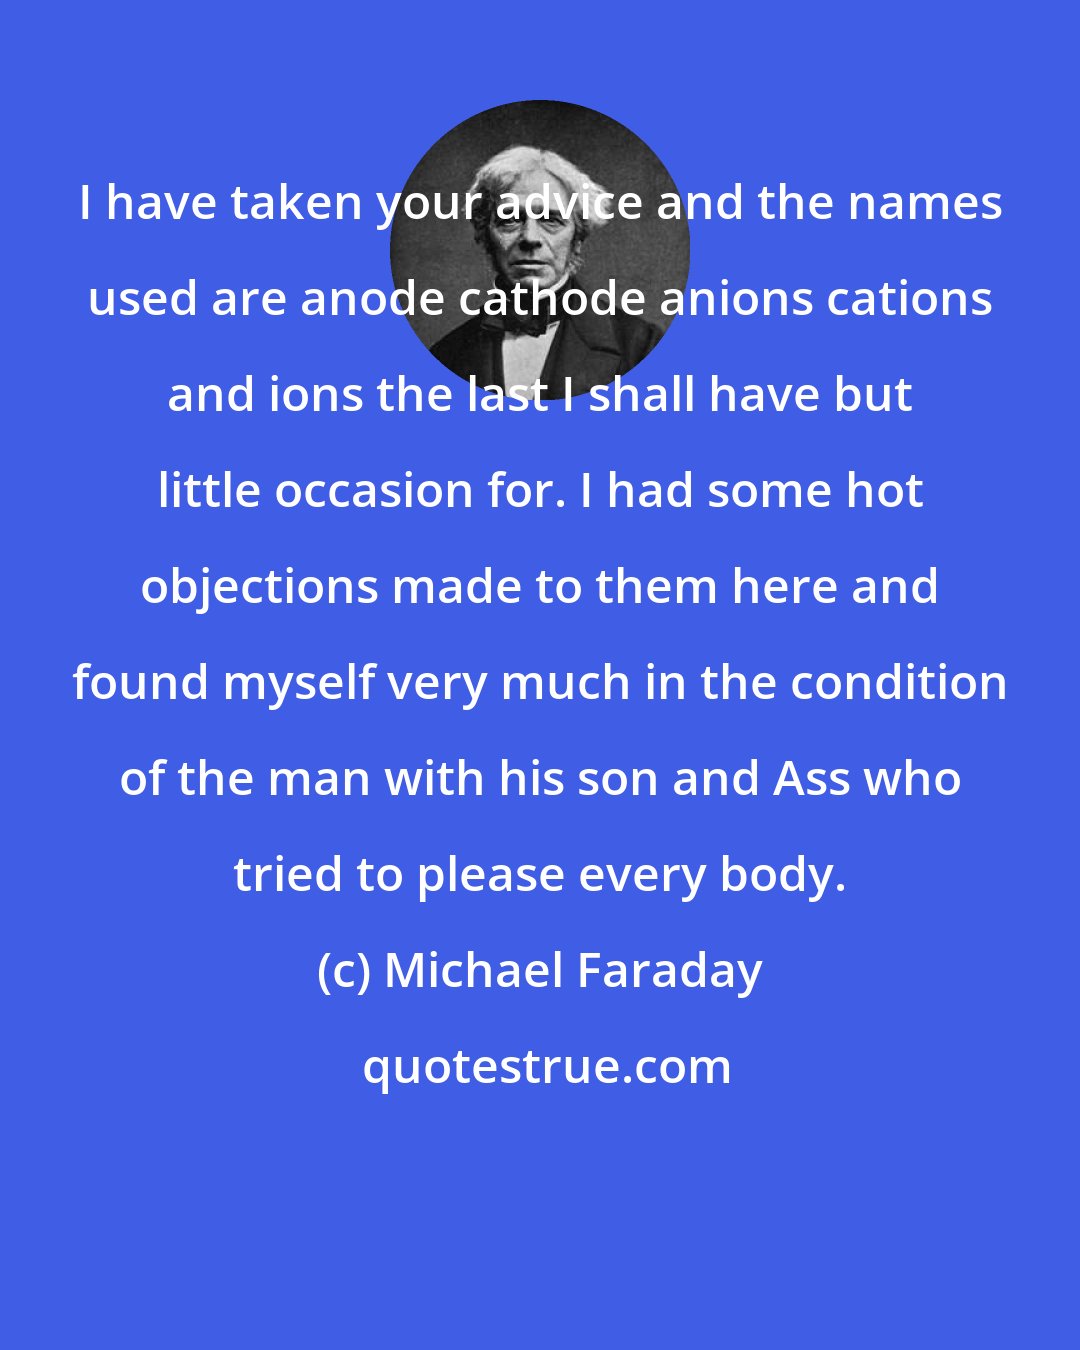 Michael Faraday: I have taken your advice and the names used are anode cathode anions cations and ions the last I shall have but little occasion for. I had some hot objections made to them here and found myself very much in the condition of the man with his son and Ass who tried to please every body.